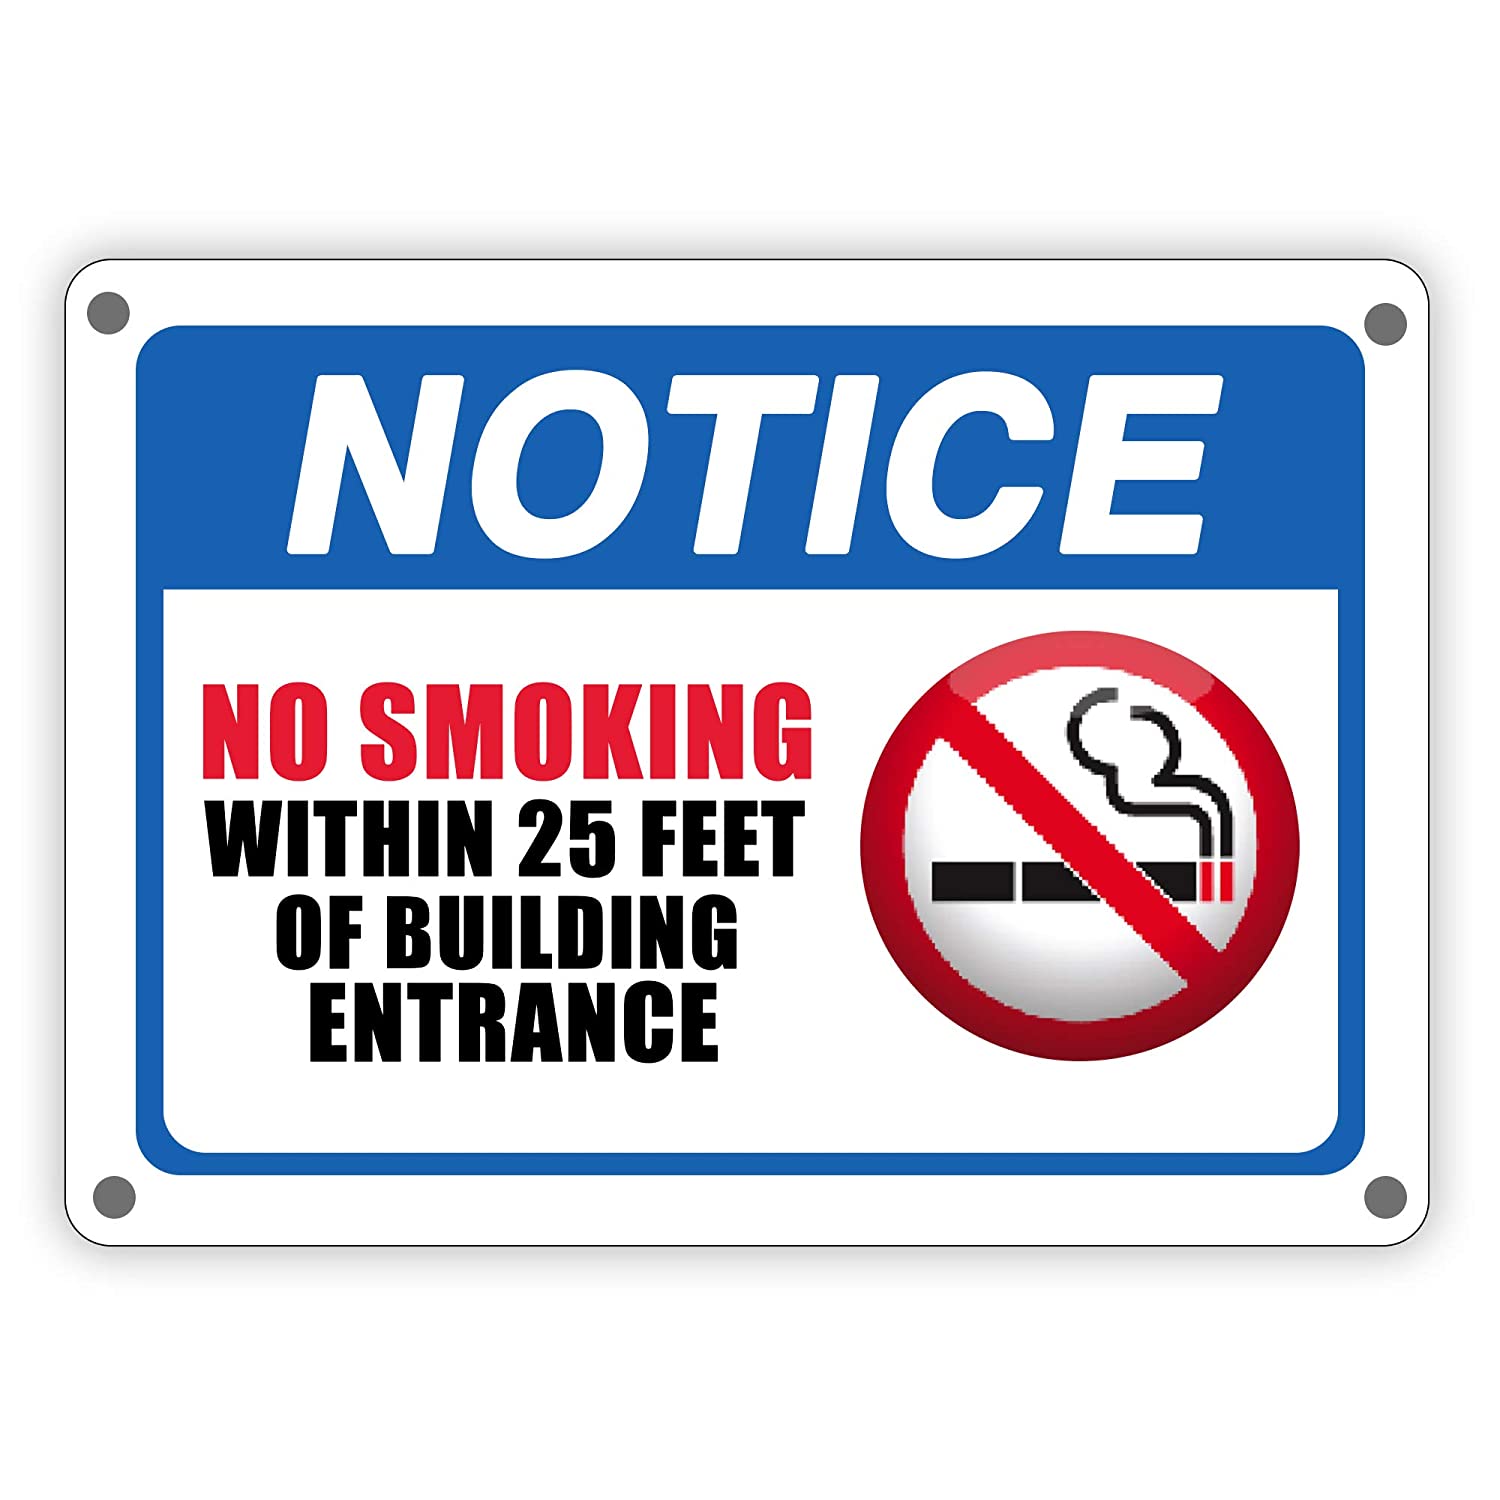 "Notice No Smoking Within 25 Feet of Building Entrance" Sign 7" X 10" Aluminum with 8 Screws Included (Pack of 2)